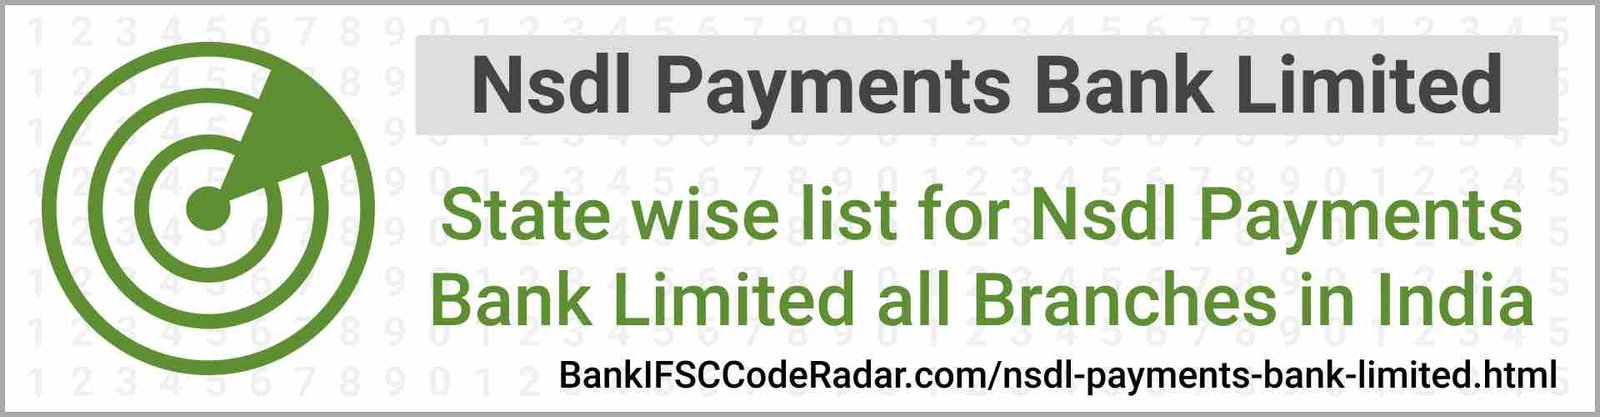 Nsdl Payments Bank Limited All Branches India